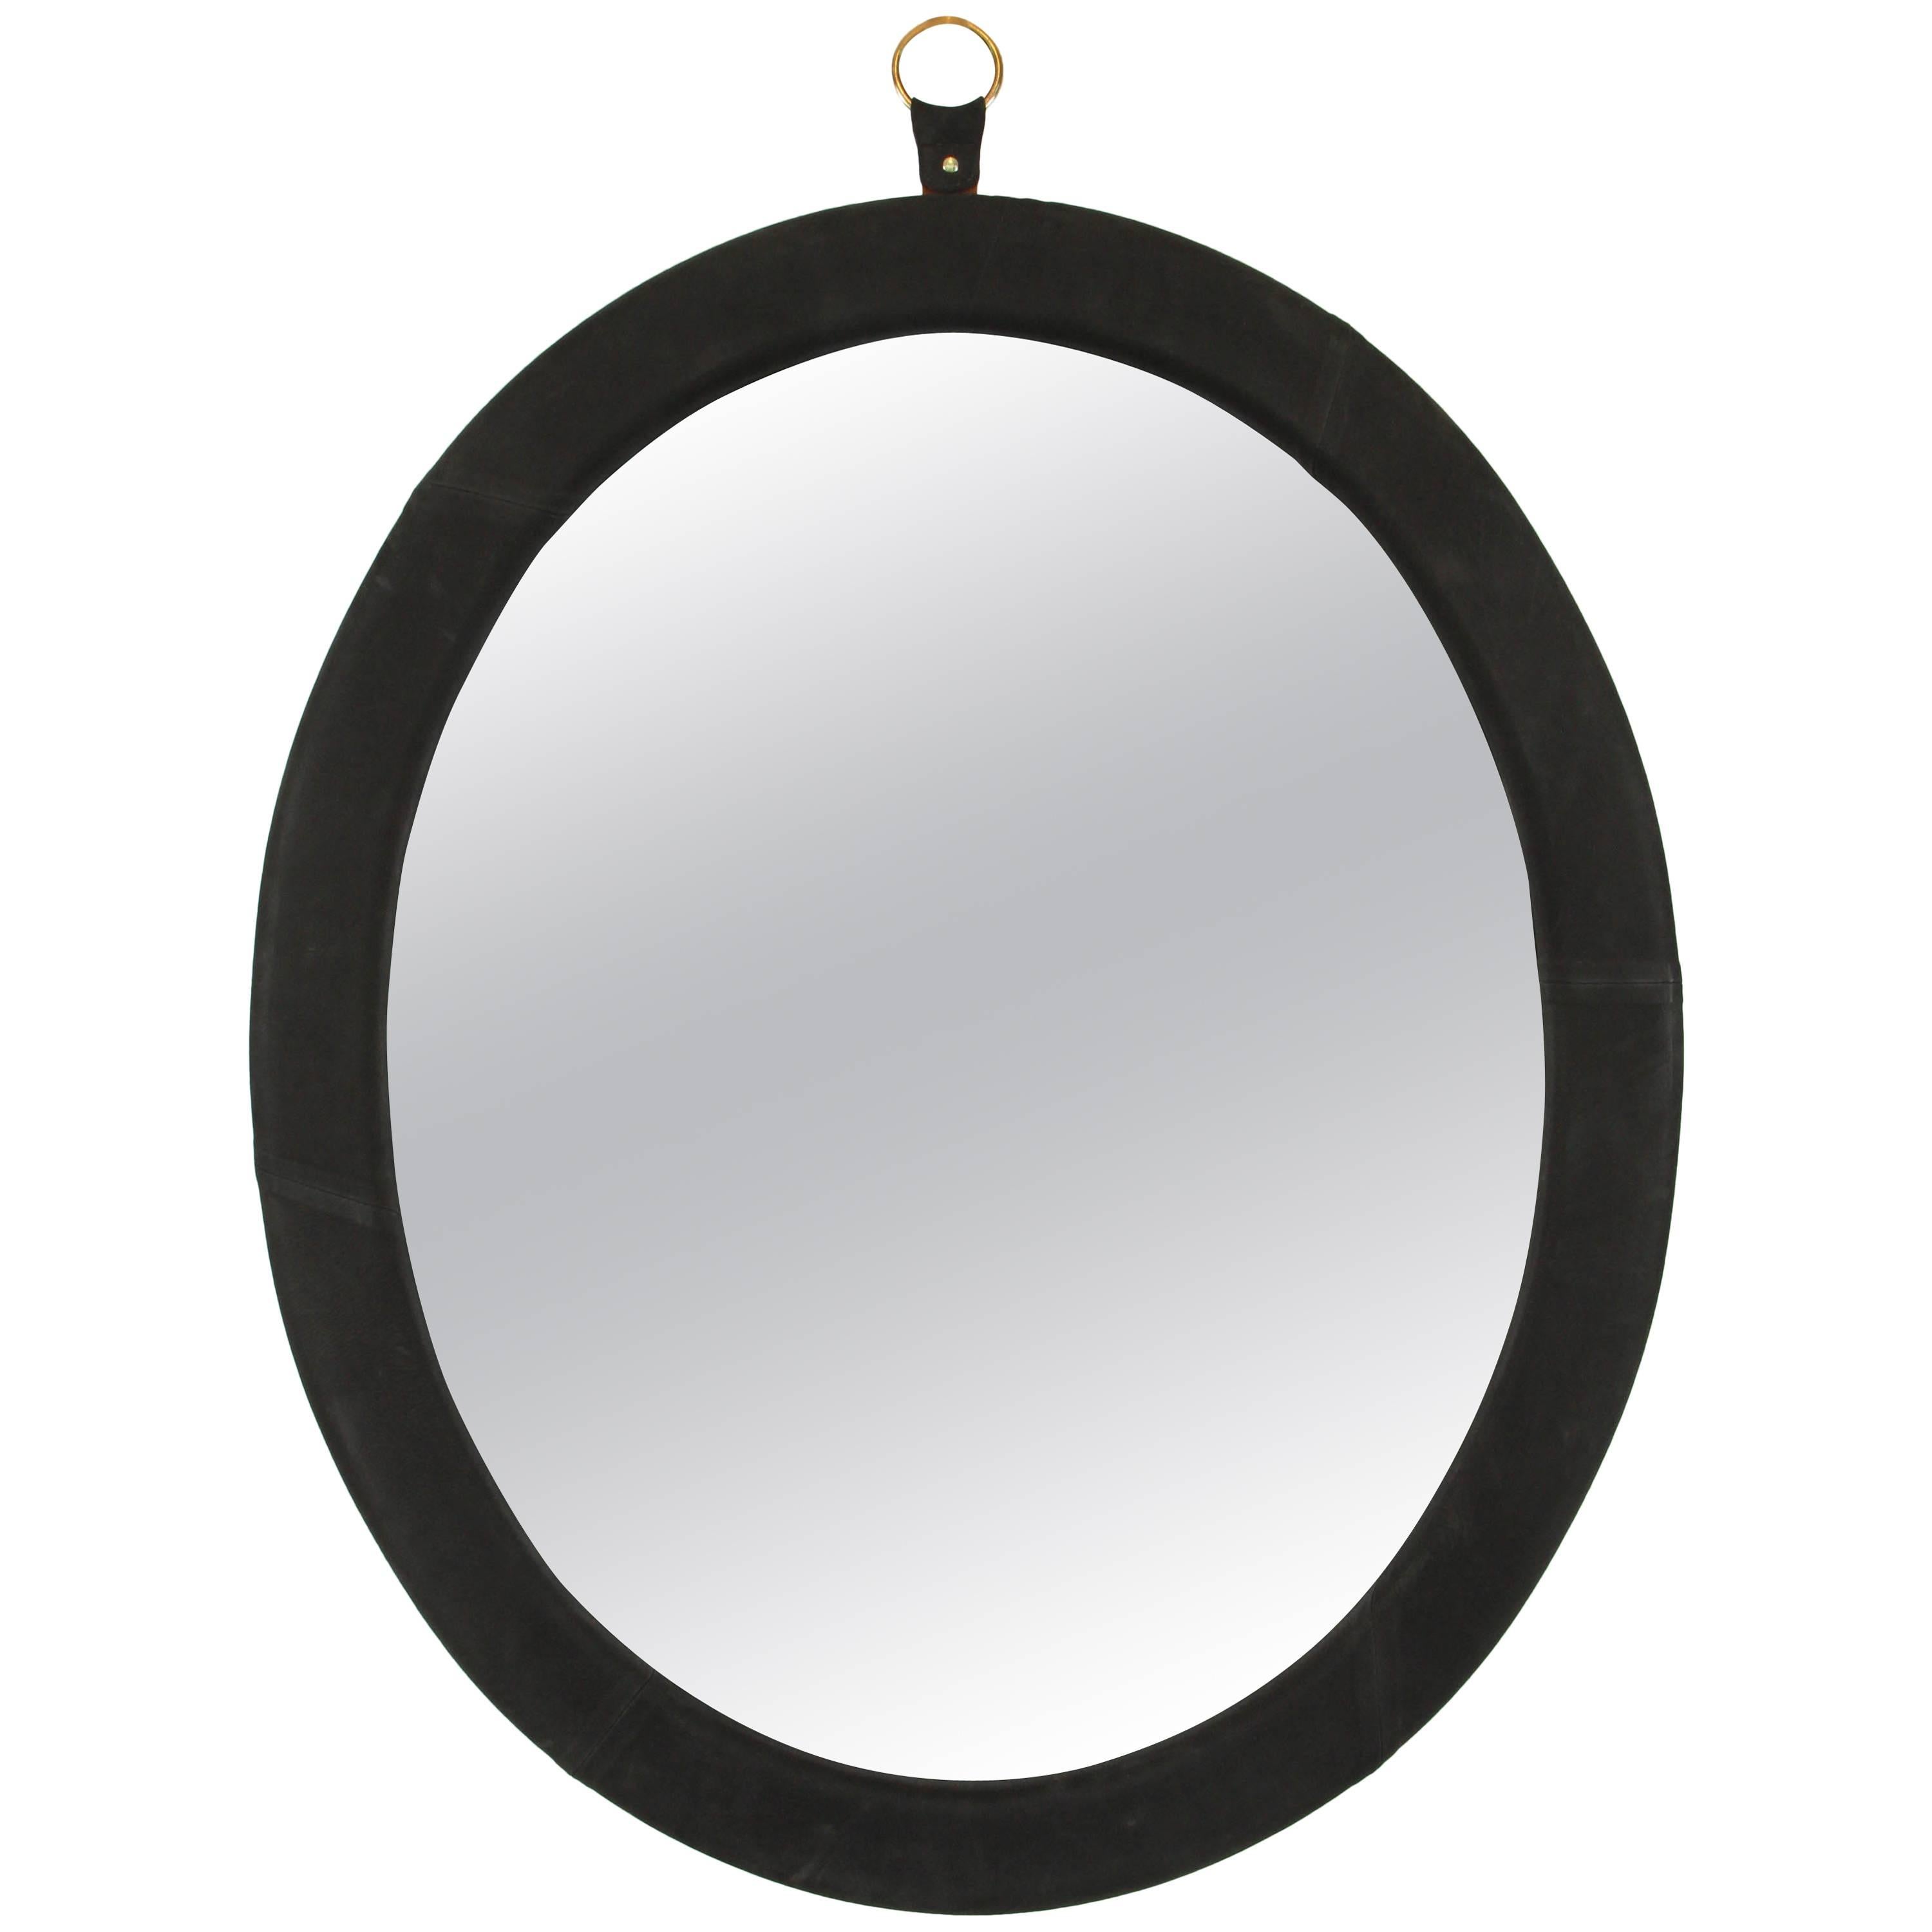 Leather Oval Mirror by Jason Koharik for Collected By